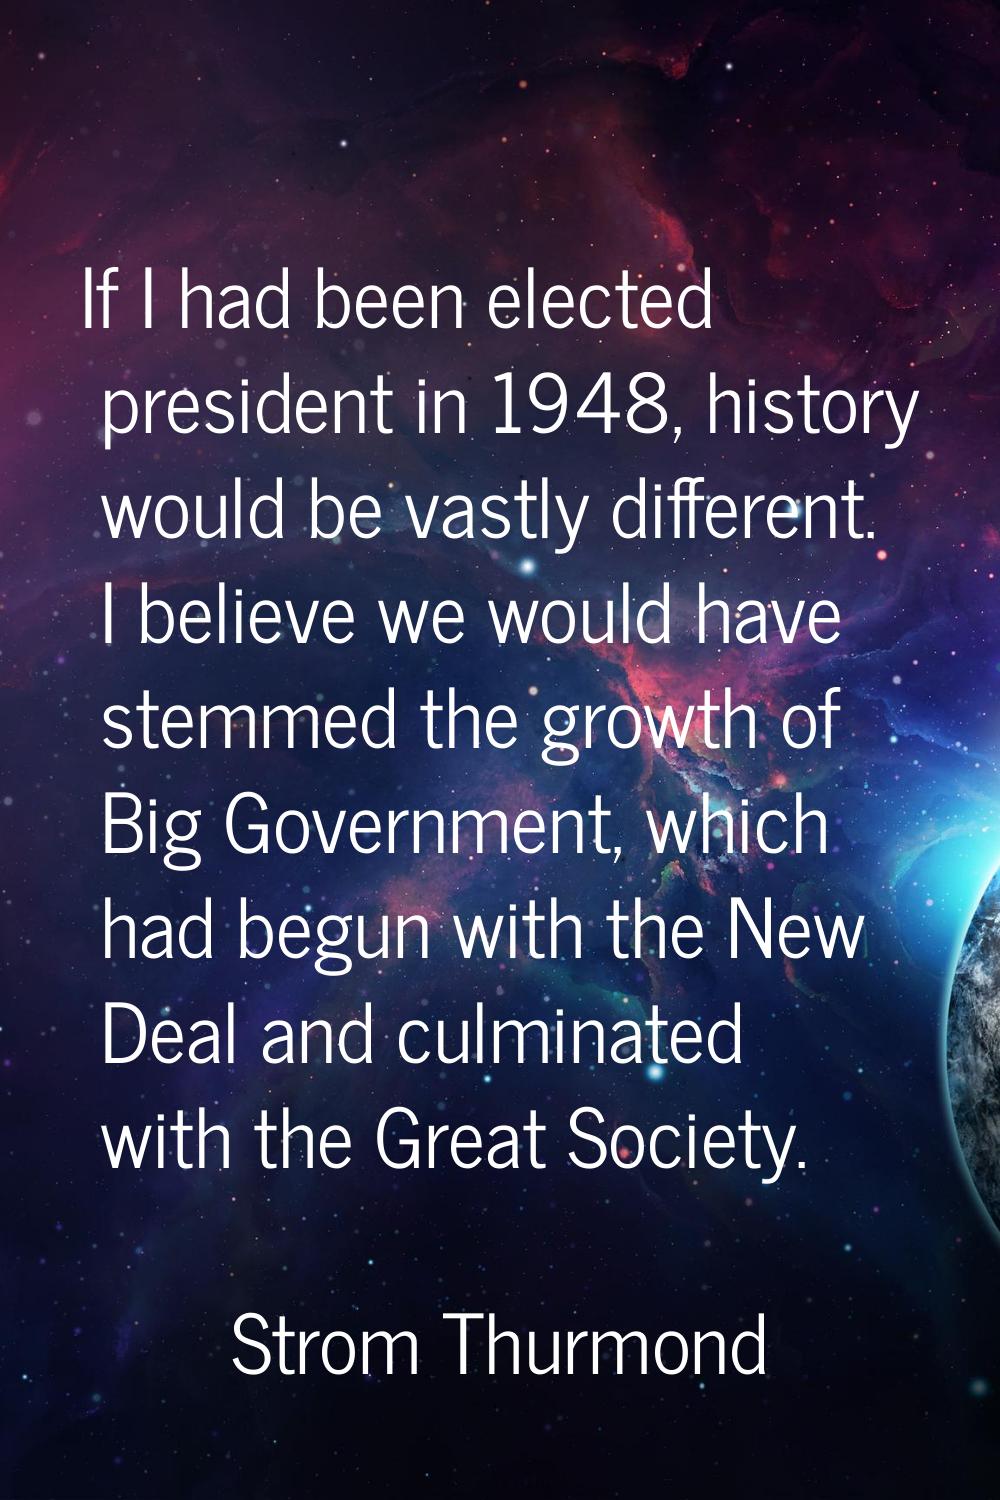 If I had been elected president in 1948, history would be vastly different. I believe we would have